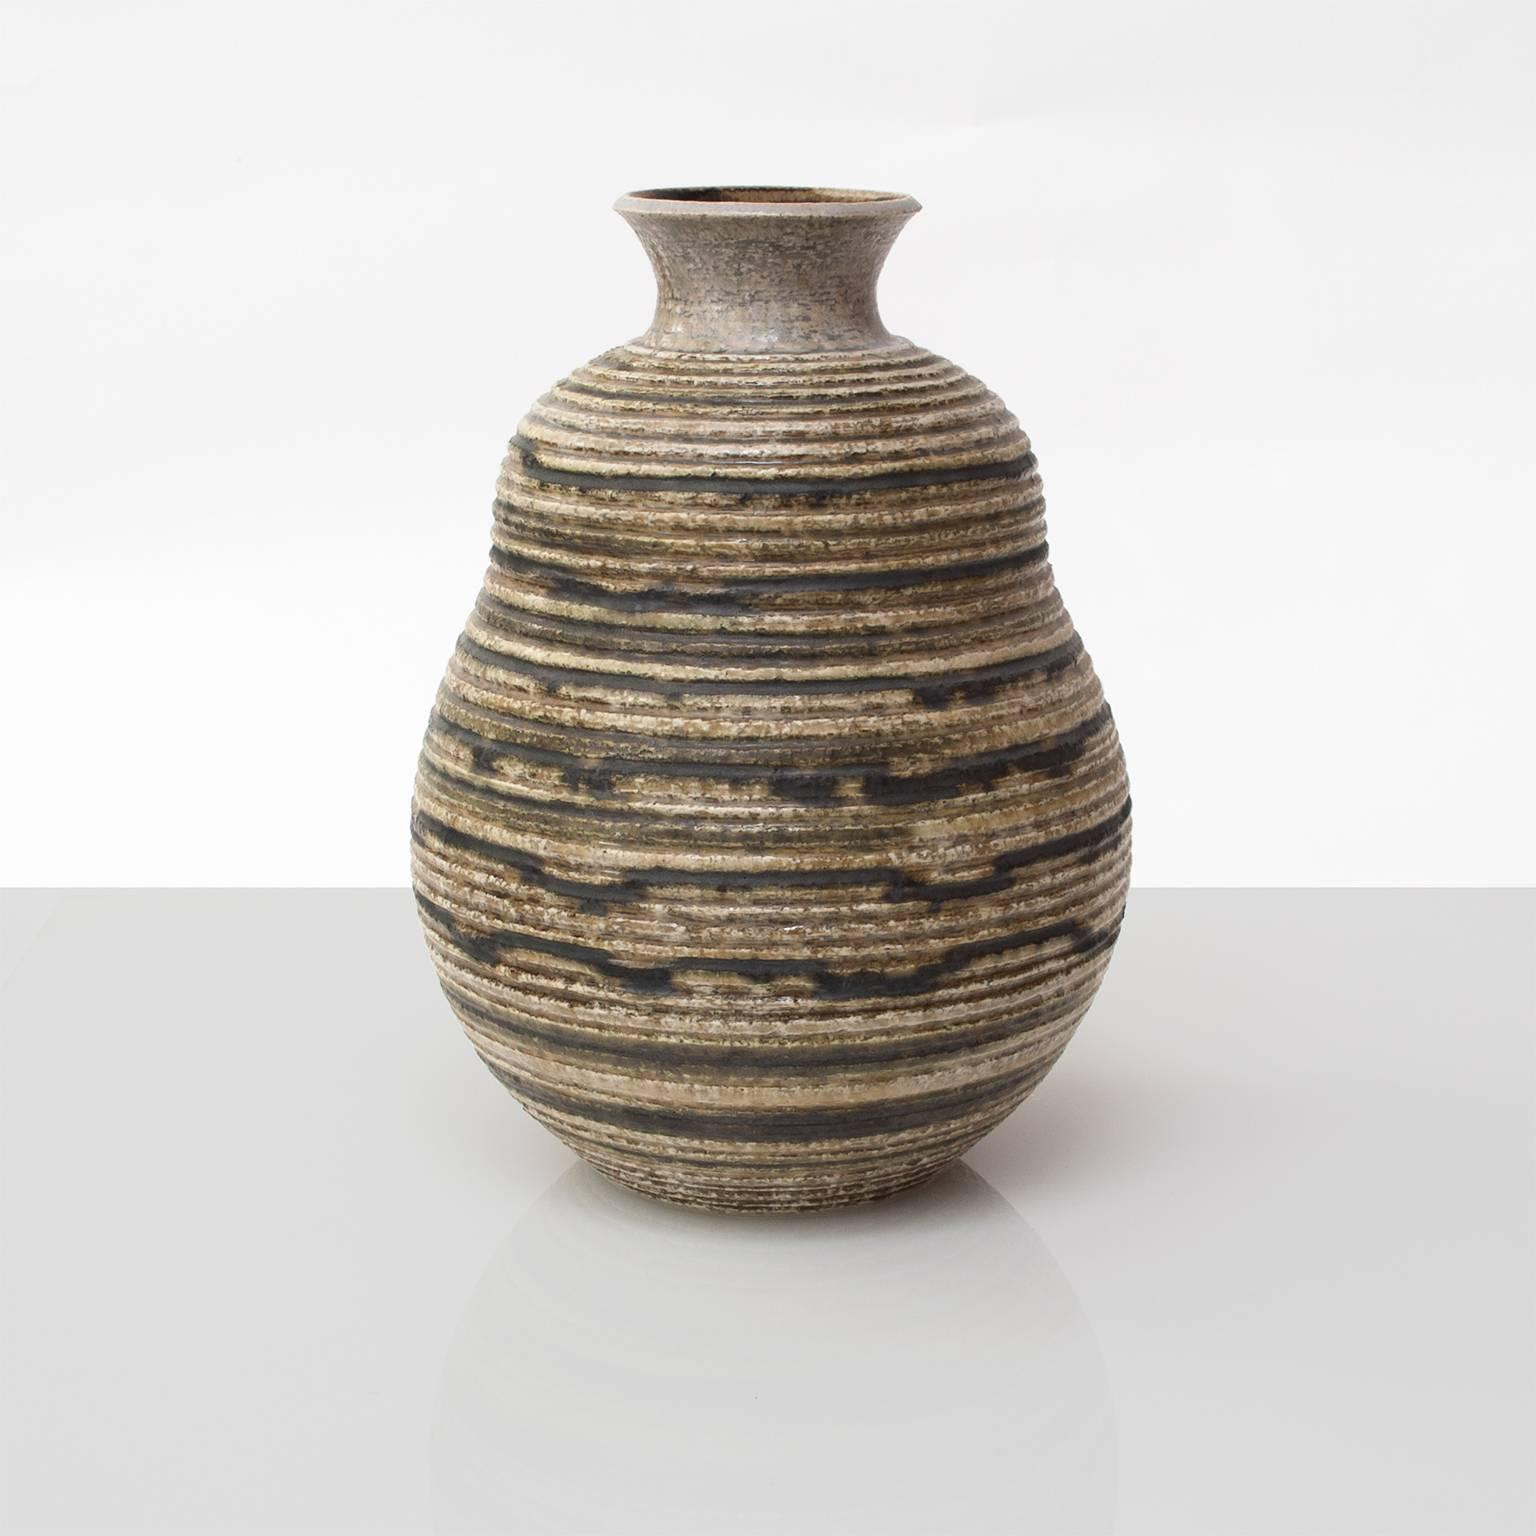 A large Scandinavian modern studio vase by Britt-Louise Sundell for Gustavsberg circa 1960. Vase is highly textured with horizontal groves and glazed in earthy, nuetral colors. 
Height: 12